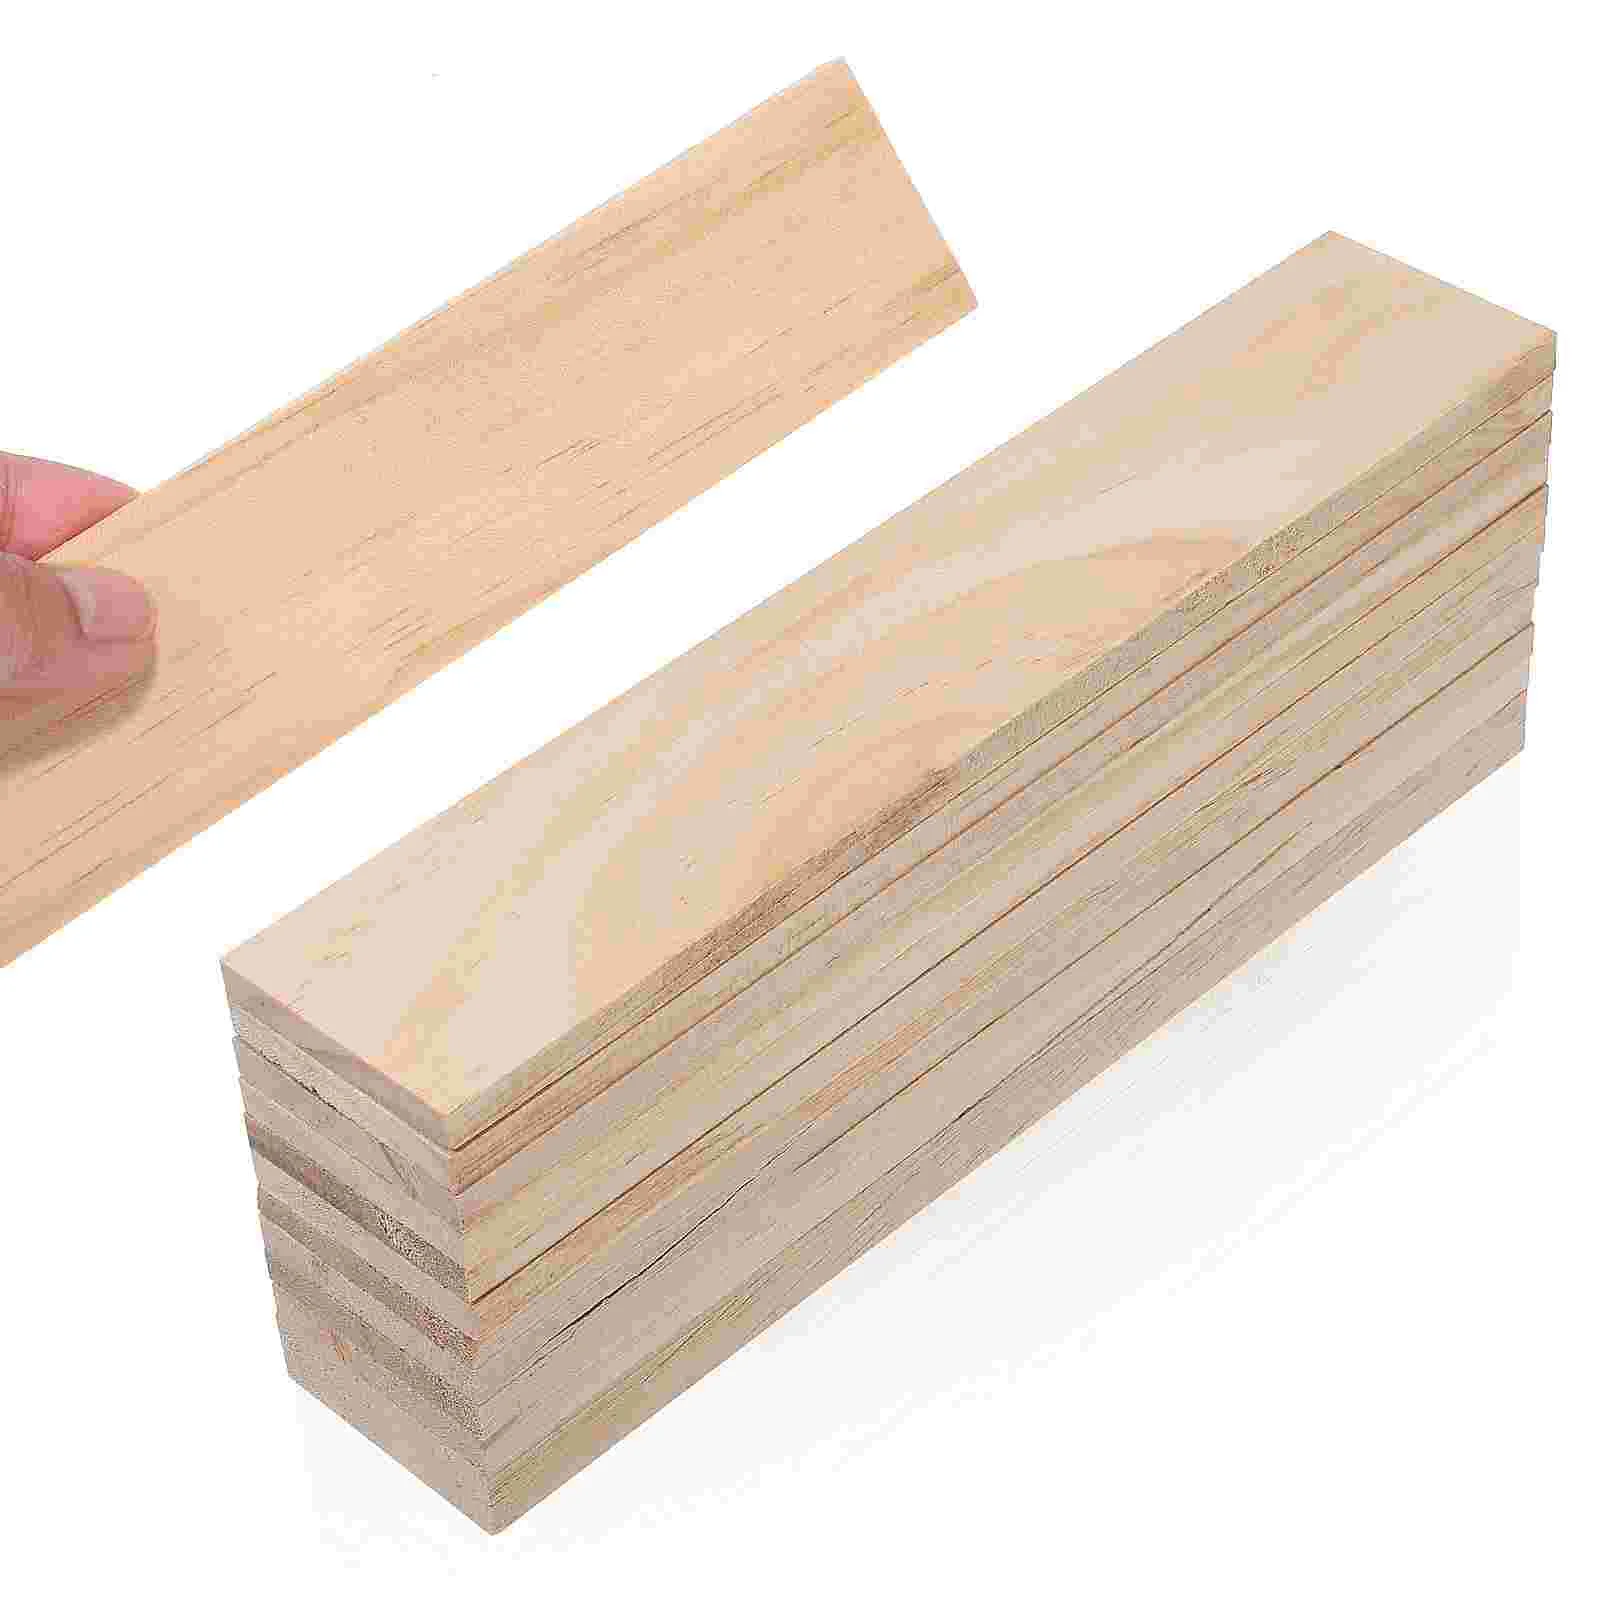 

12 Pcs Wooden Carving Crafts Rectangle Unfinished Boards Shelves Planks Small Block Blocks Crafting